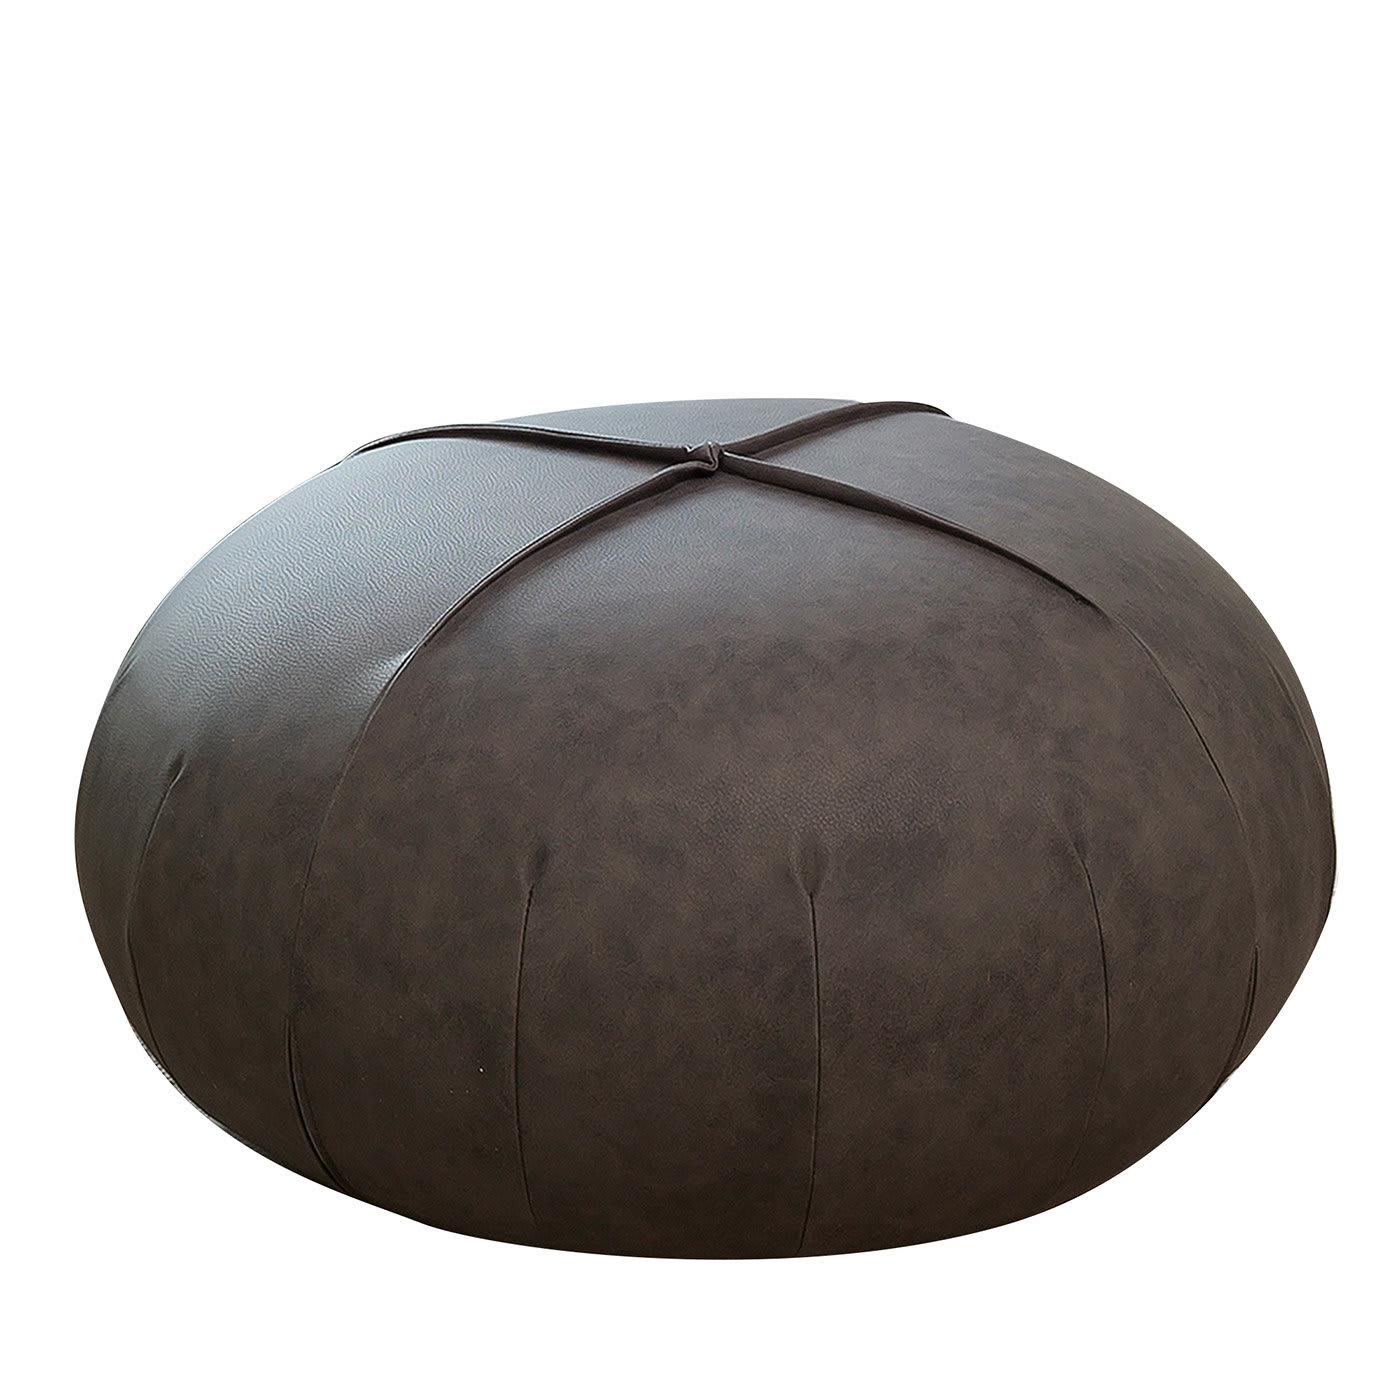 Point Mud Pouf - Dall'Agnese